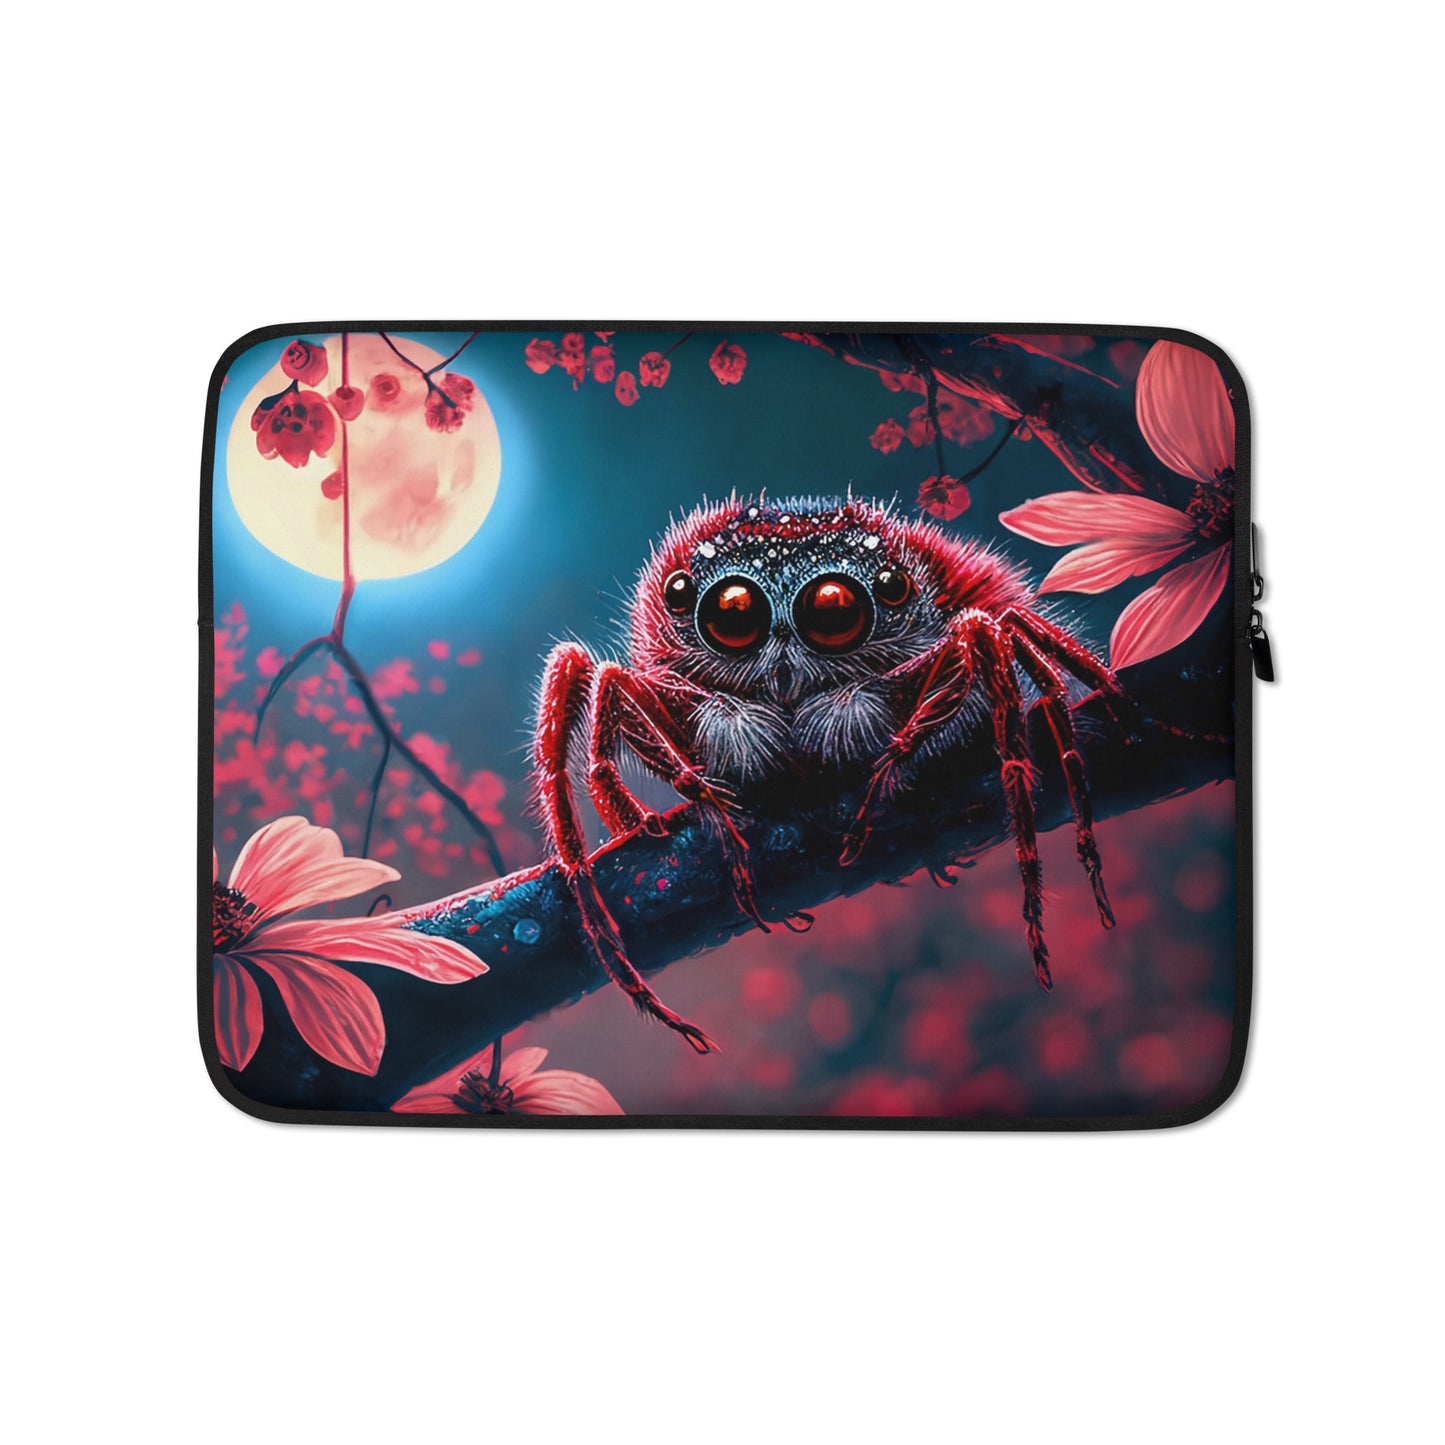 Cherry Blossom Jumping Spider Laptop Sleeve - Jumping Spiders For Sale - Spiders Source - #1 Regal Jumping Spider Store